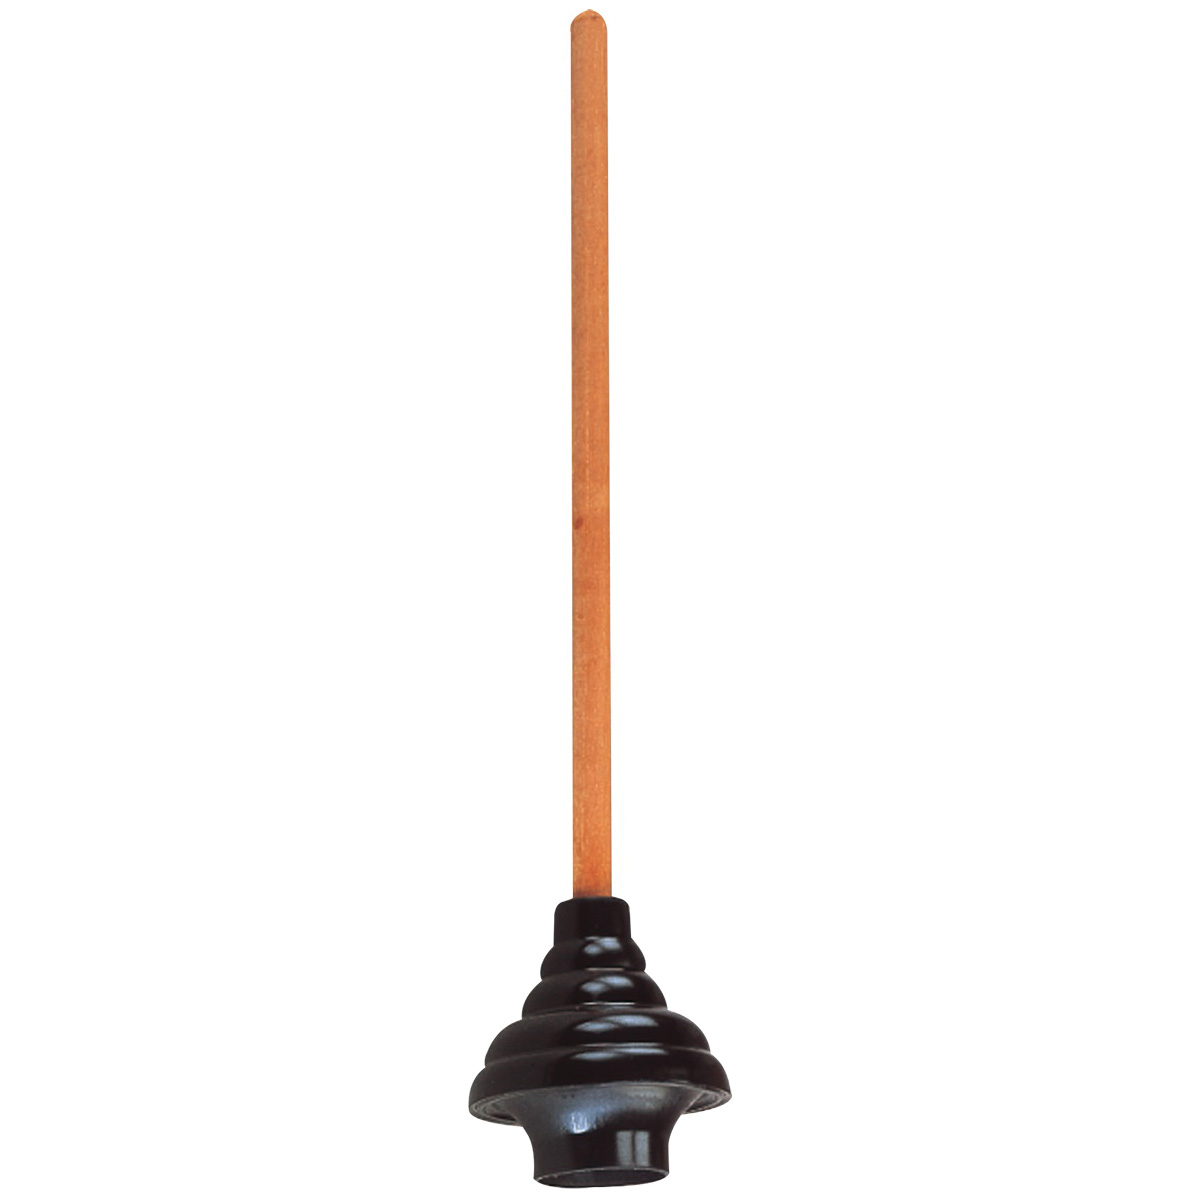 8324-B-D3L Plunger, 24-5/8 In OAL, 5-1/2 in Cup, Long Handle